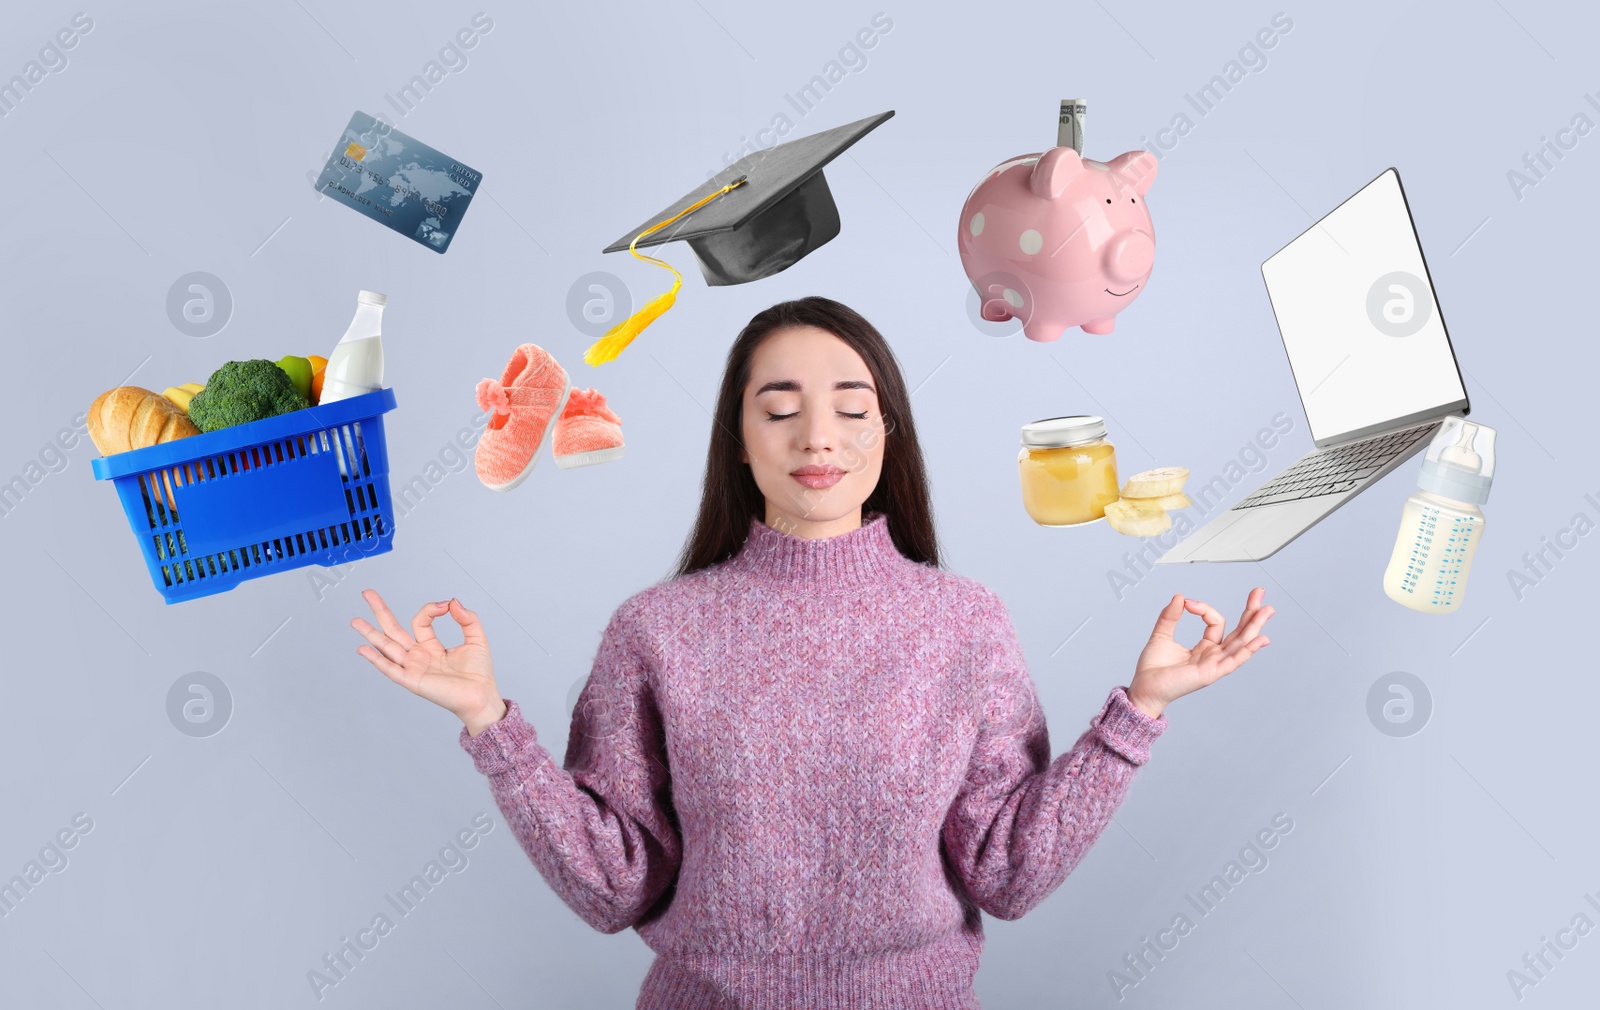 Image of Calm happy woman and different objects around her on light grey background. Balance in life  